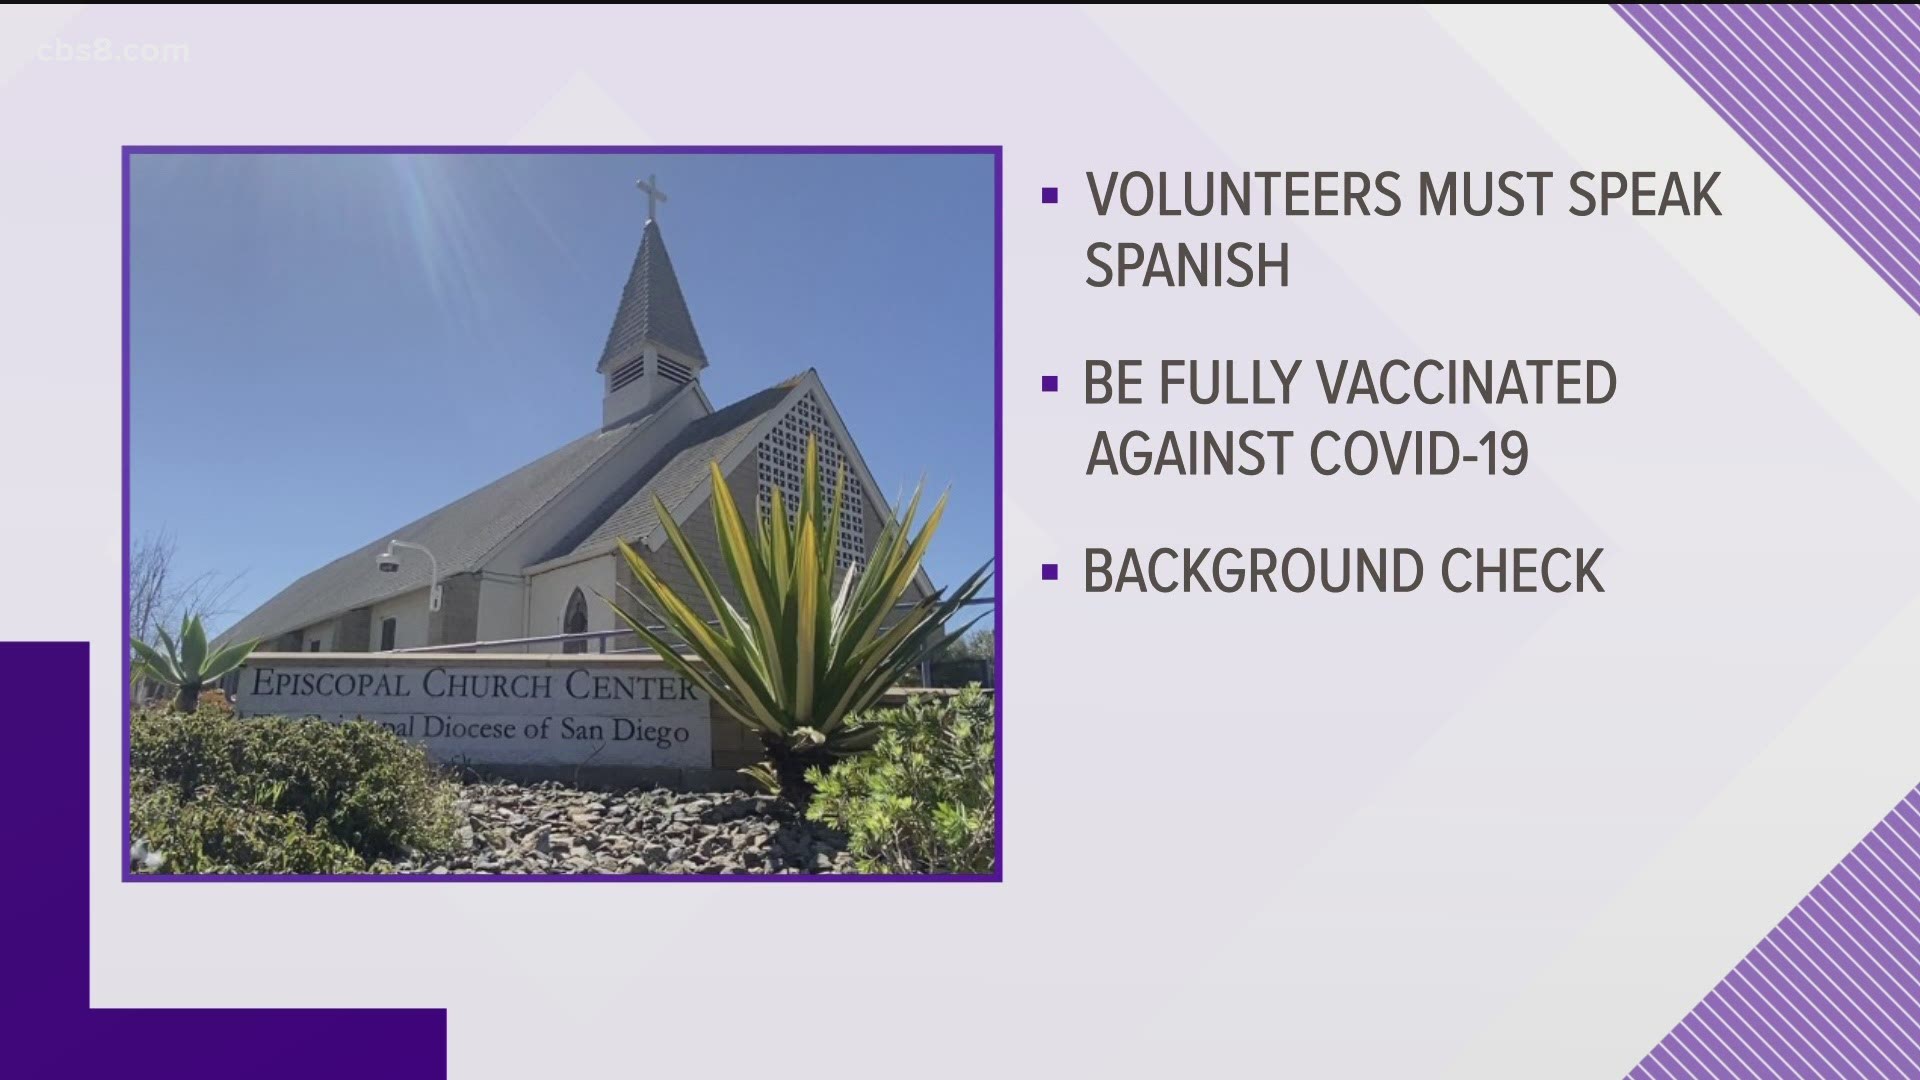 The Episcopal Diocese of San Diego says they are looking for faith-based volunteers and counselors immediately.